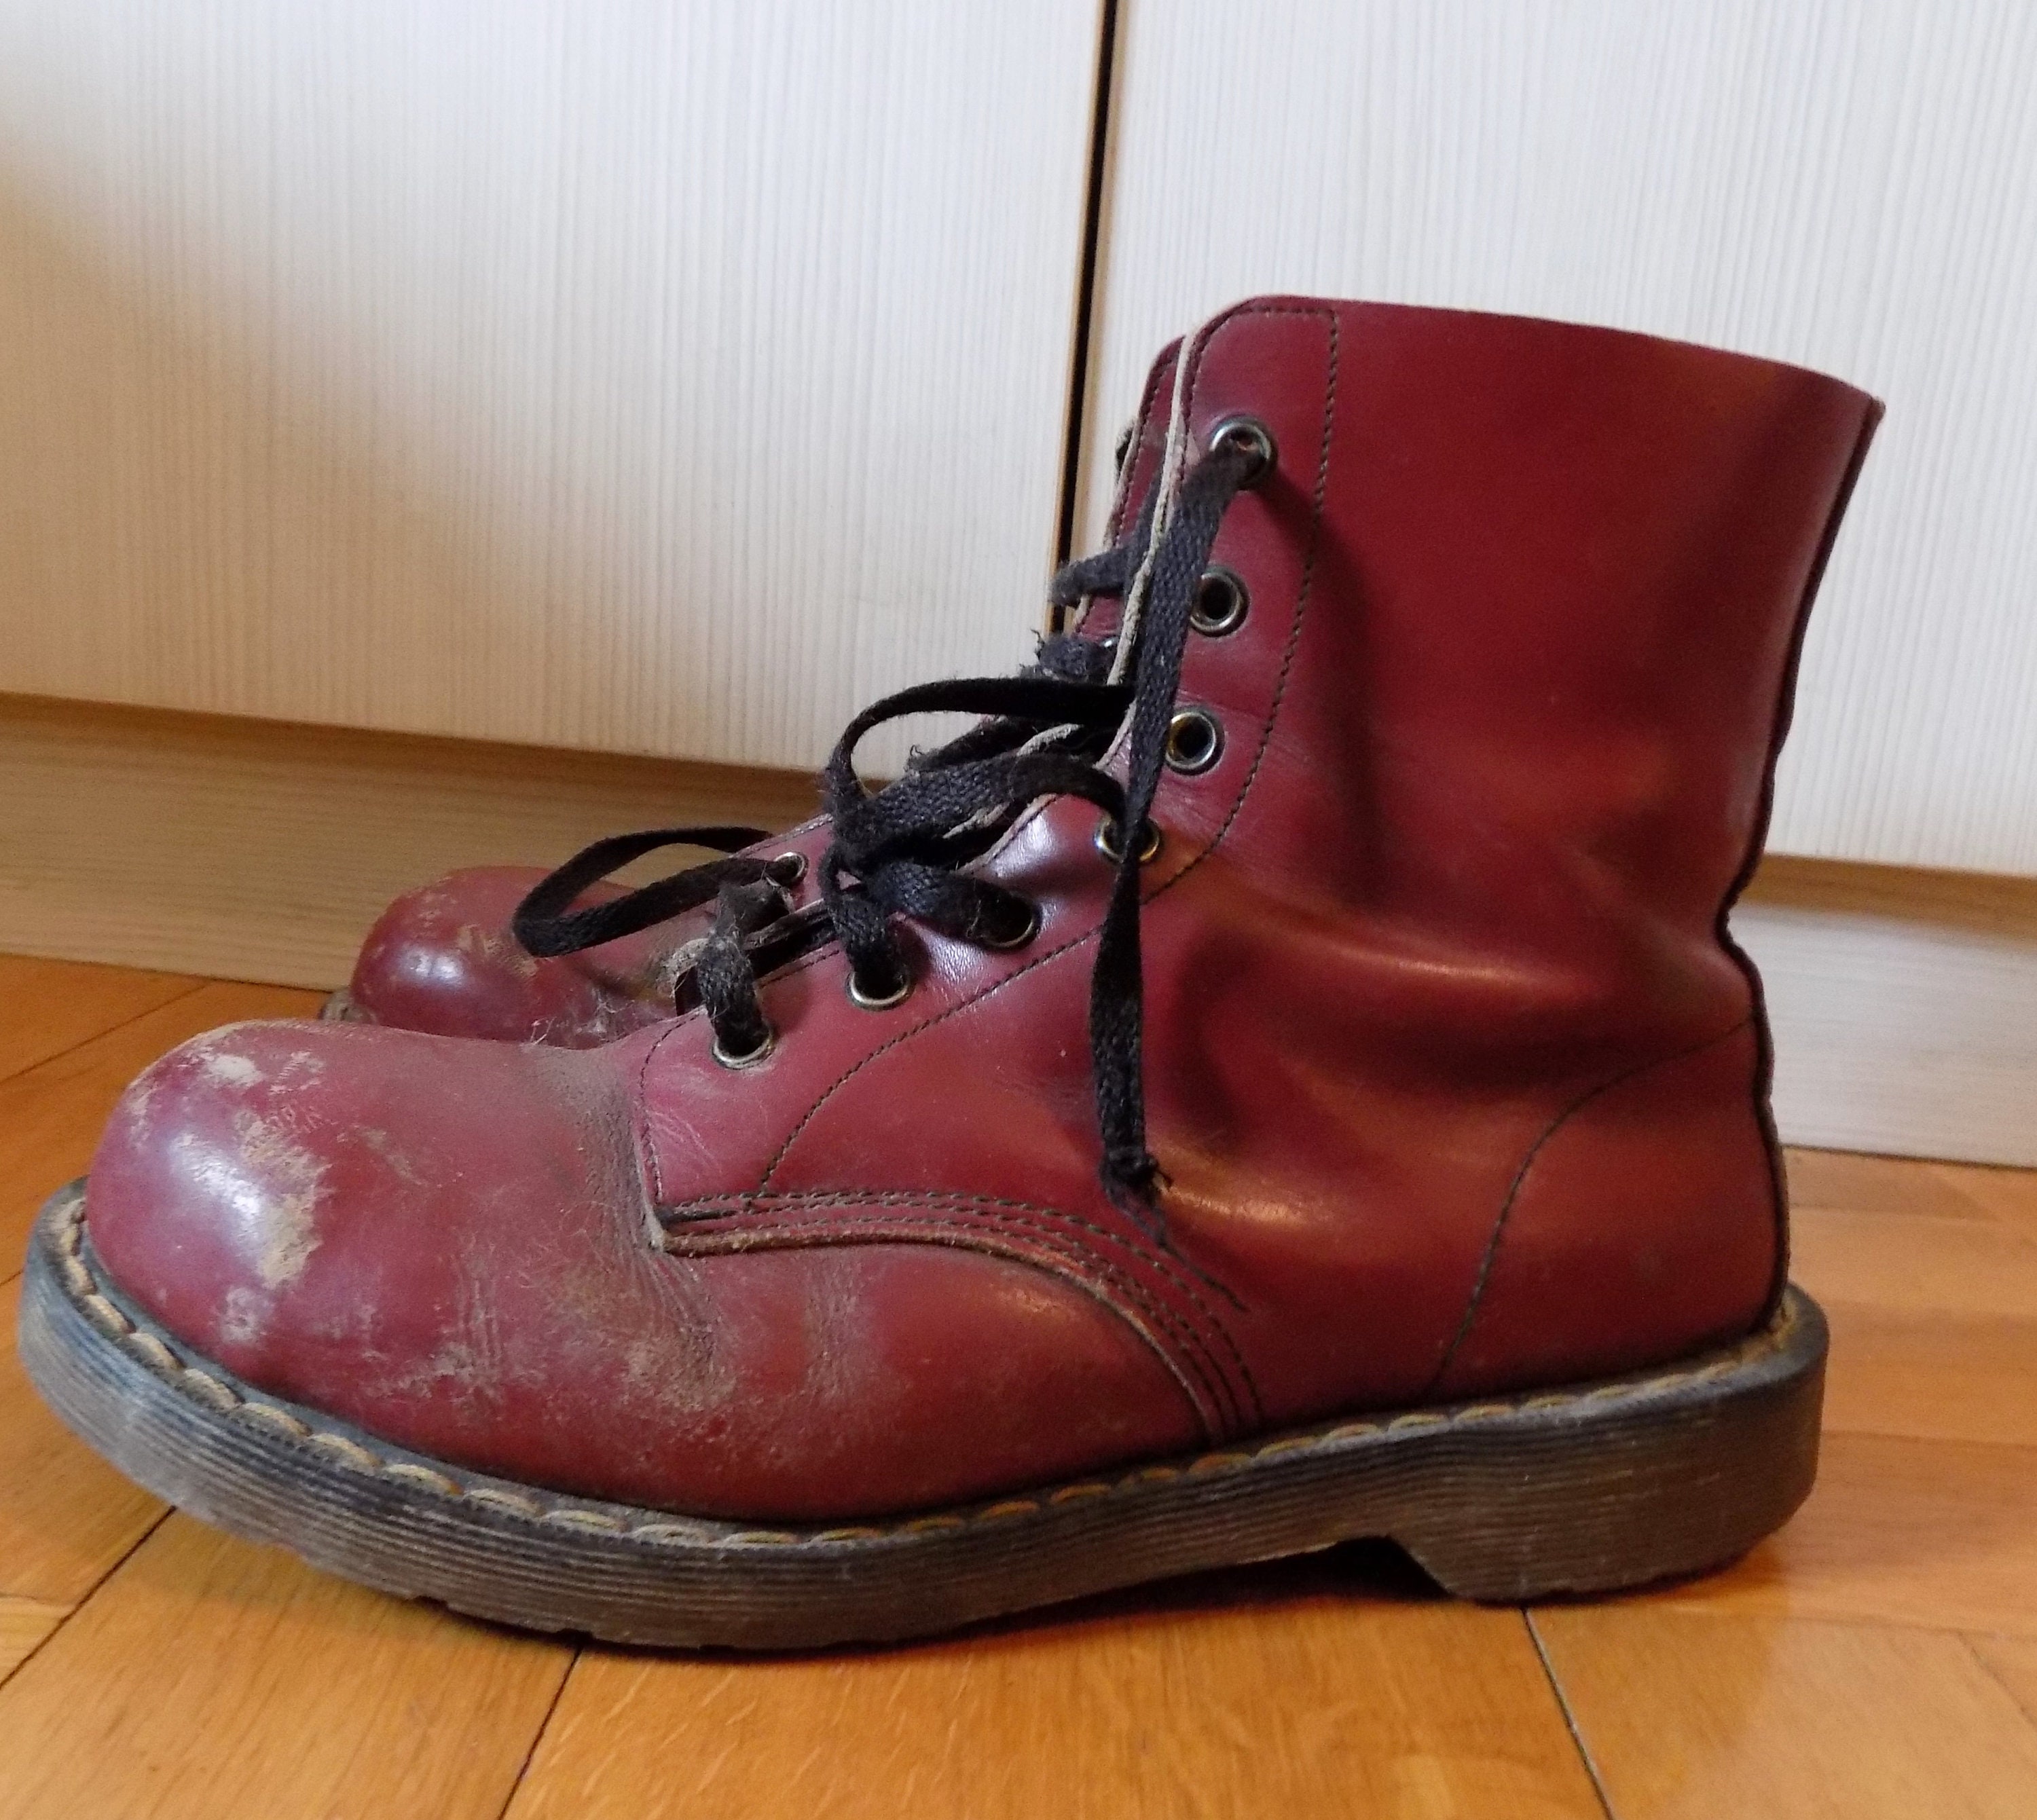 Used Doc Martens 39 - Etsy